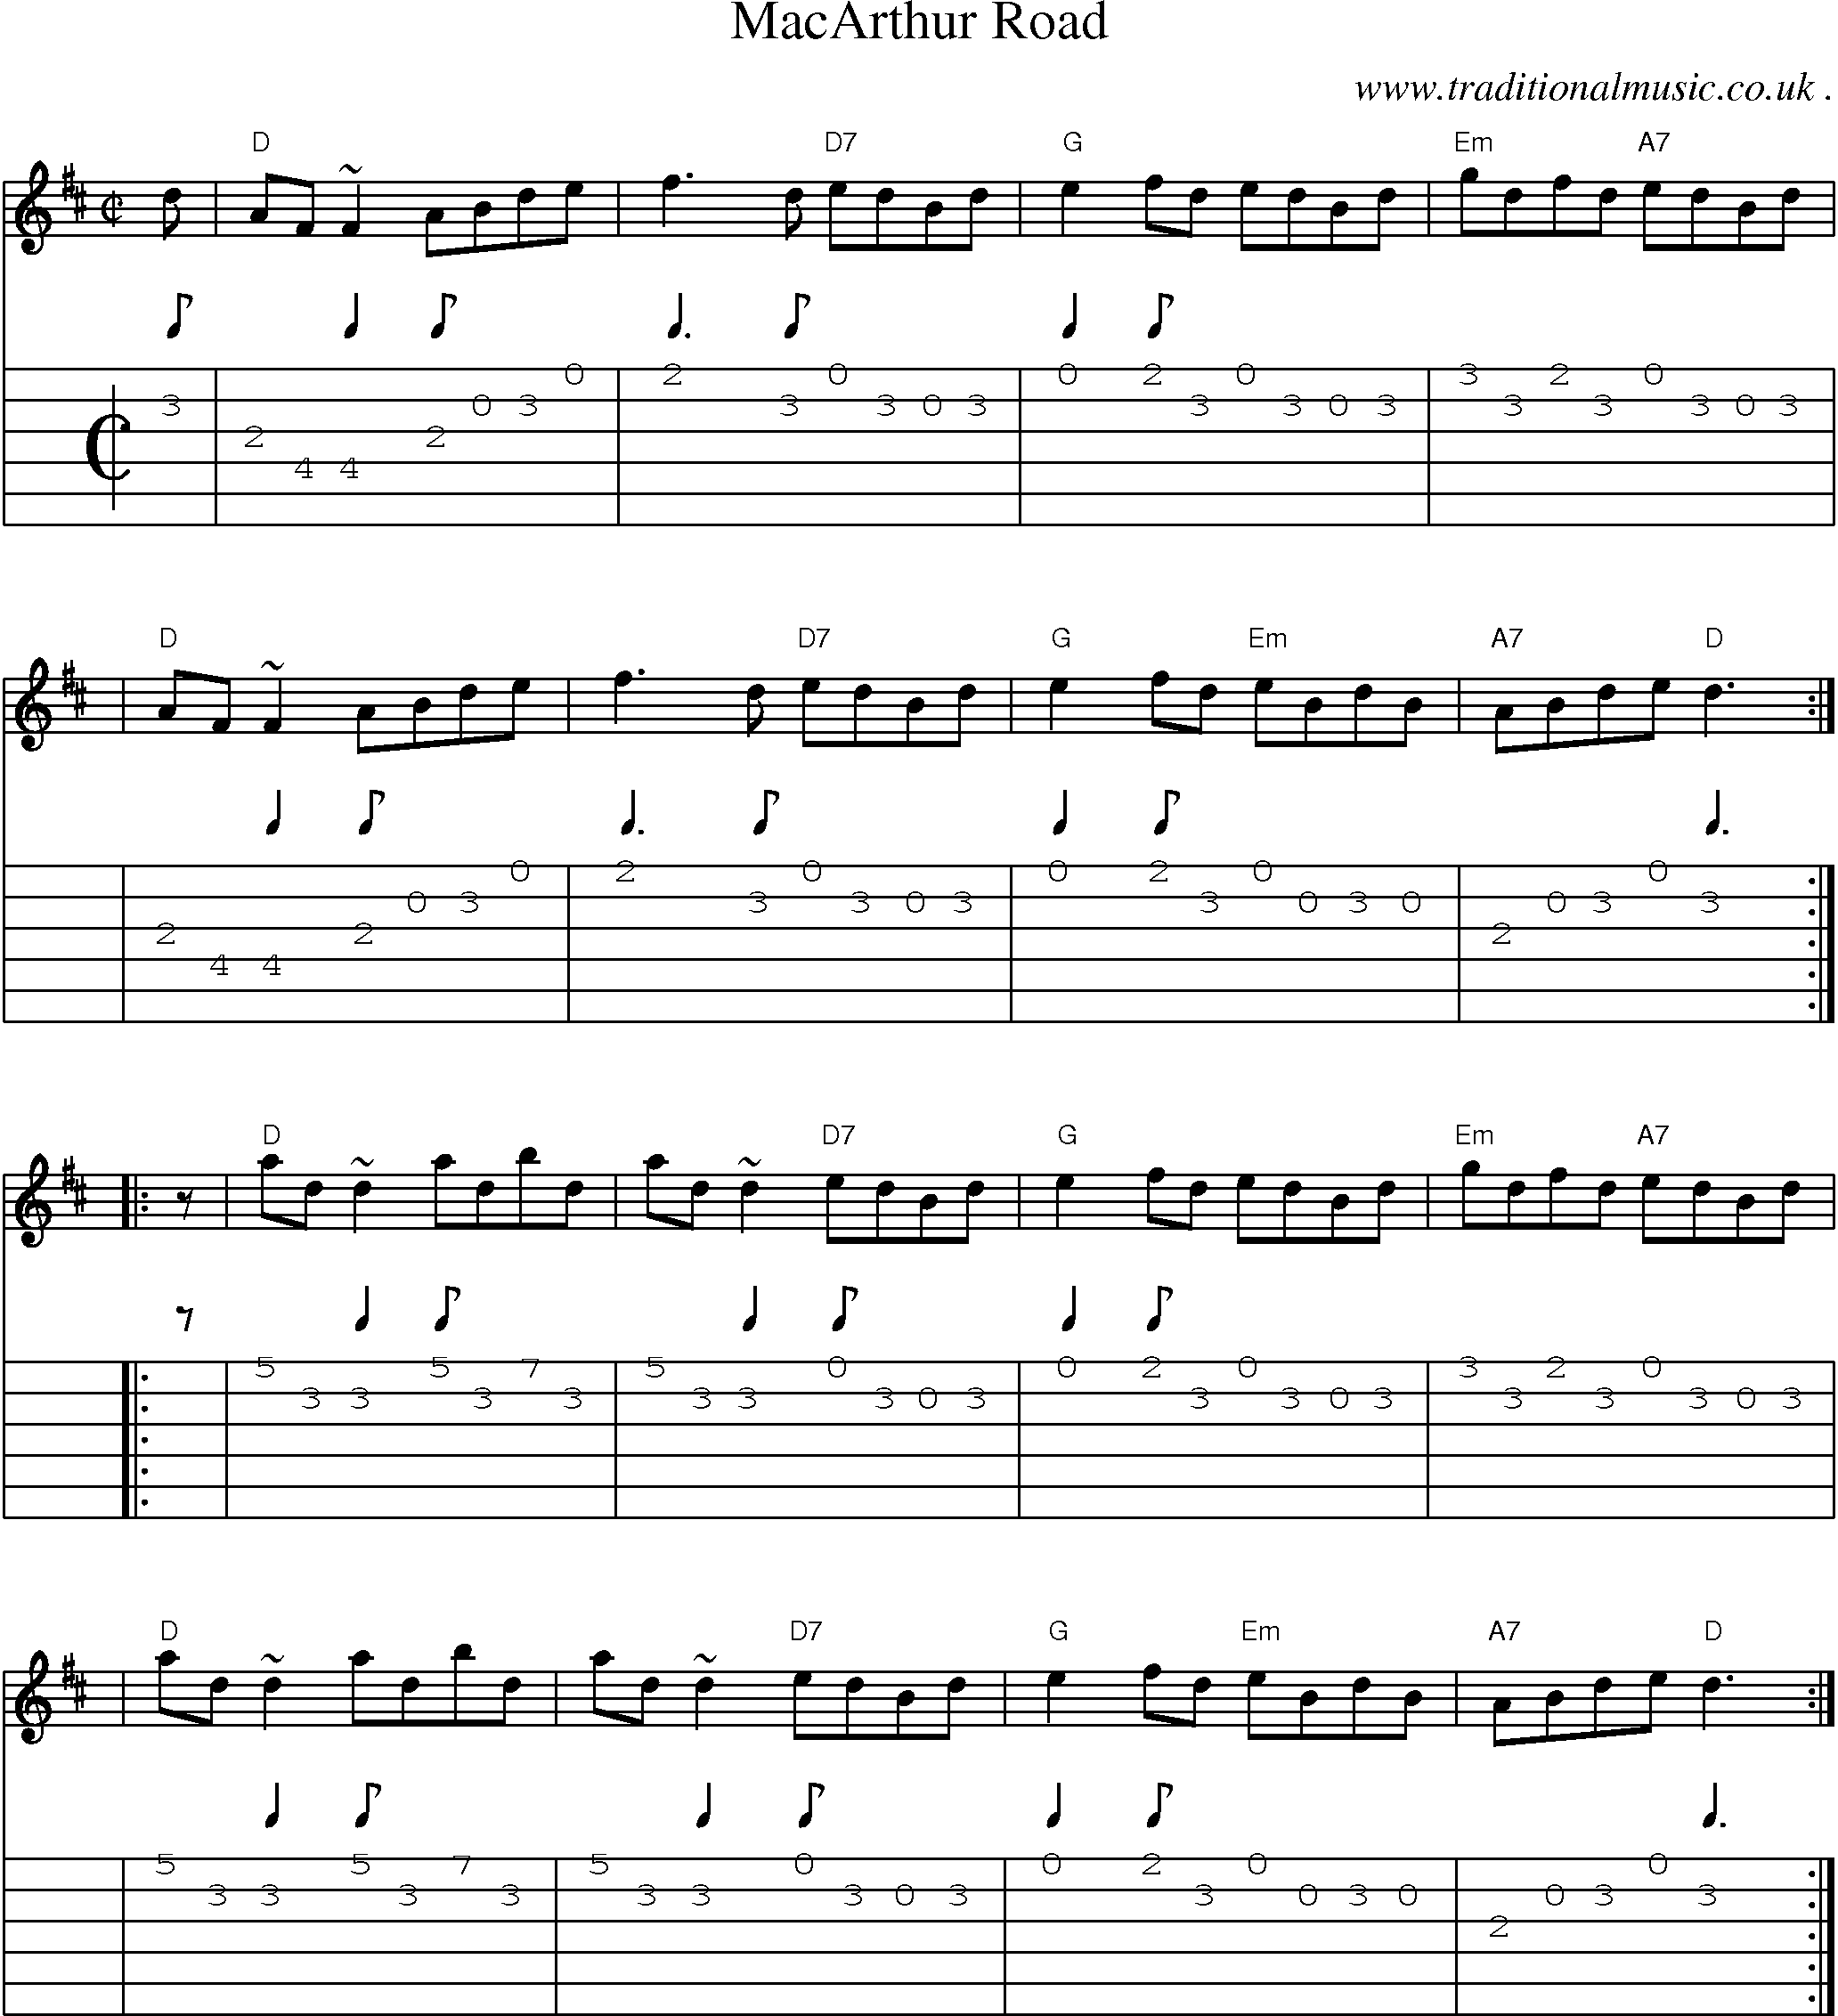 Sheet-music  score, Chords and Guitar Tabs for Macarthur Road